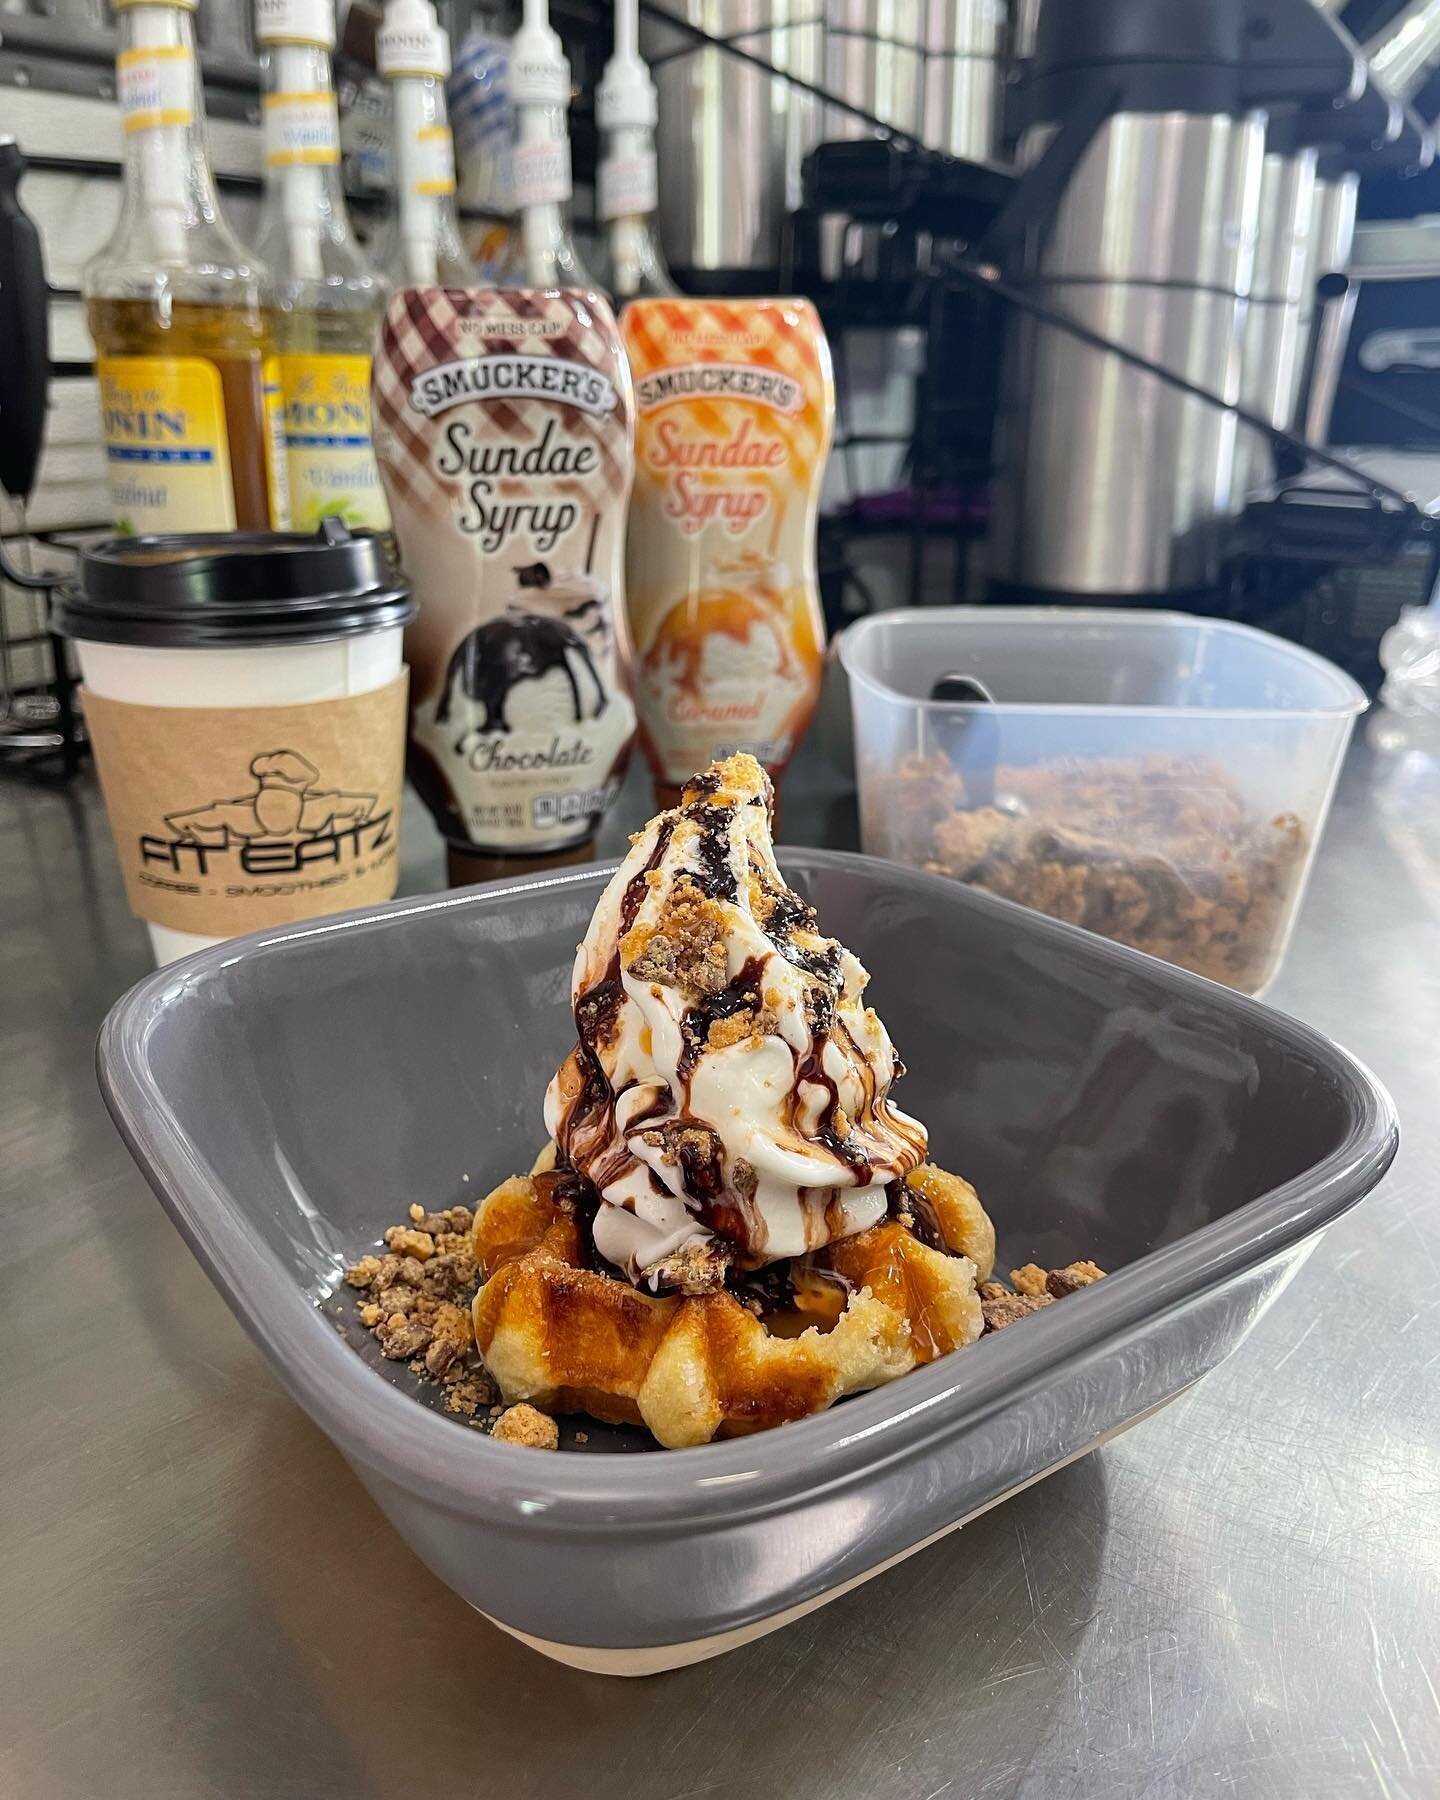 🚨🚨NEW CREATION🚨🚨 &ldquo;Waffle Sunday&rdquo; We just tried it and it was &ldquo;lit&rdquo; as the young kids say! This one has chocolate, caramel, peanut butter cups, protein ice cream over a warm waffle! But we will have other flavors! Come out 